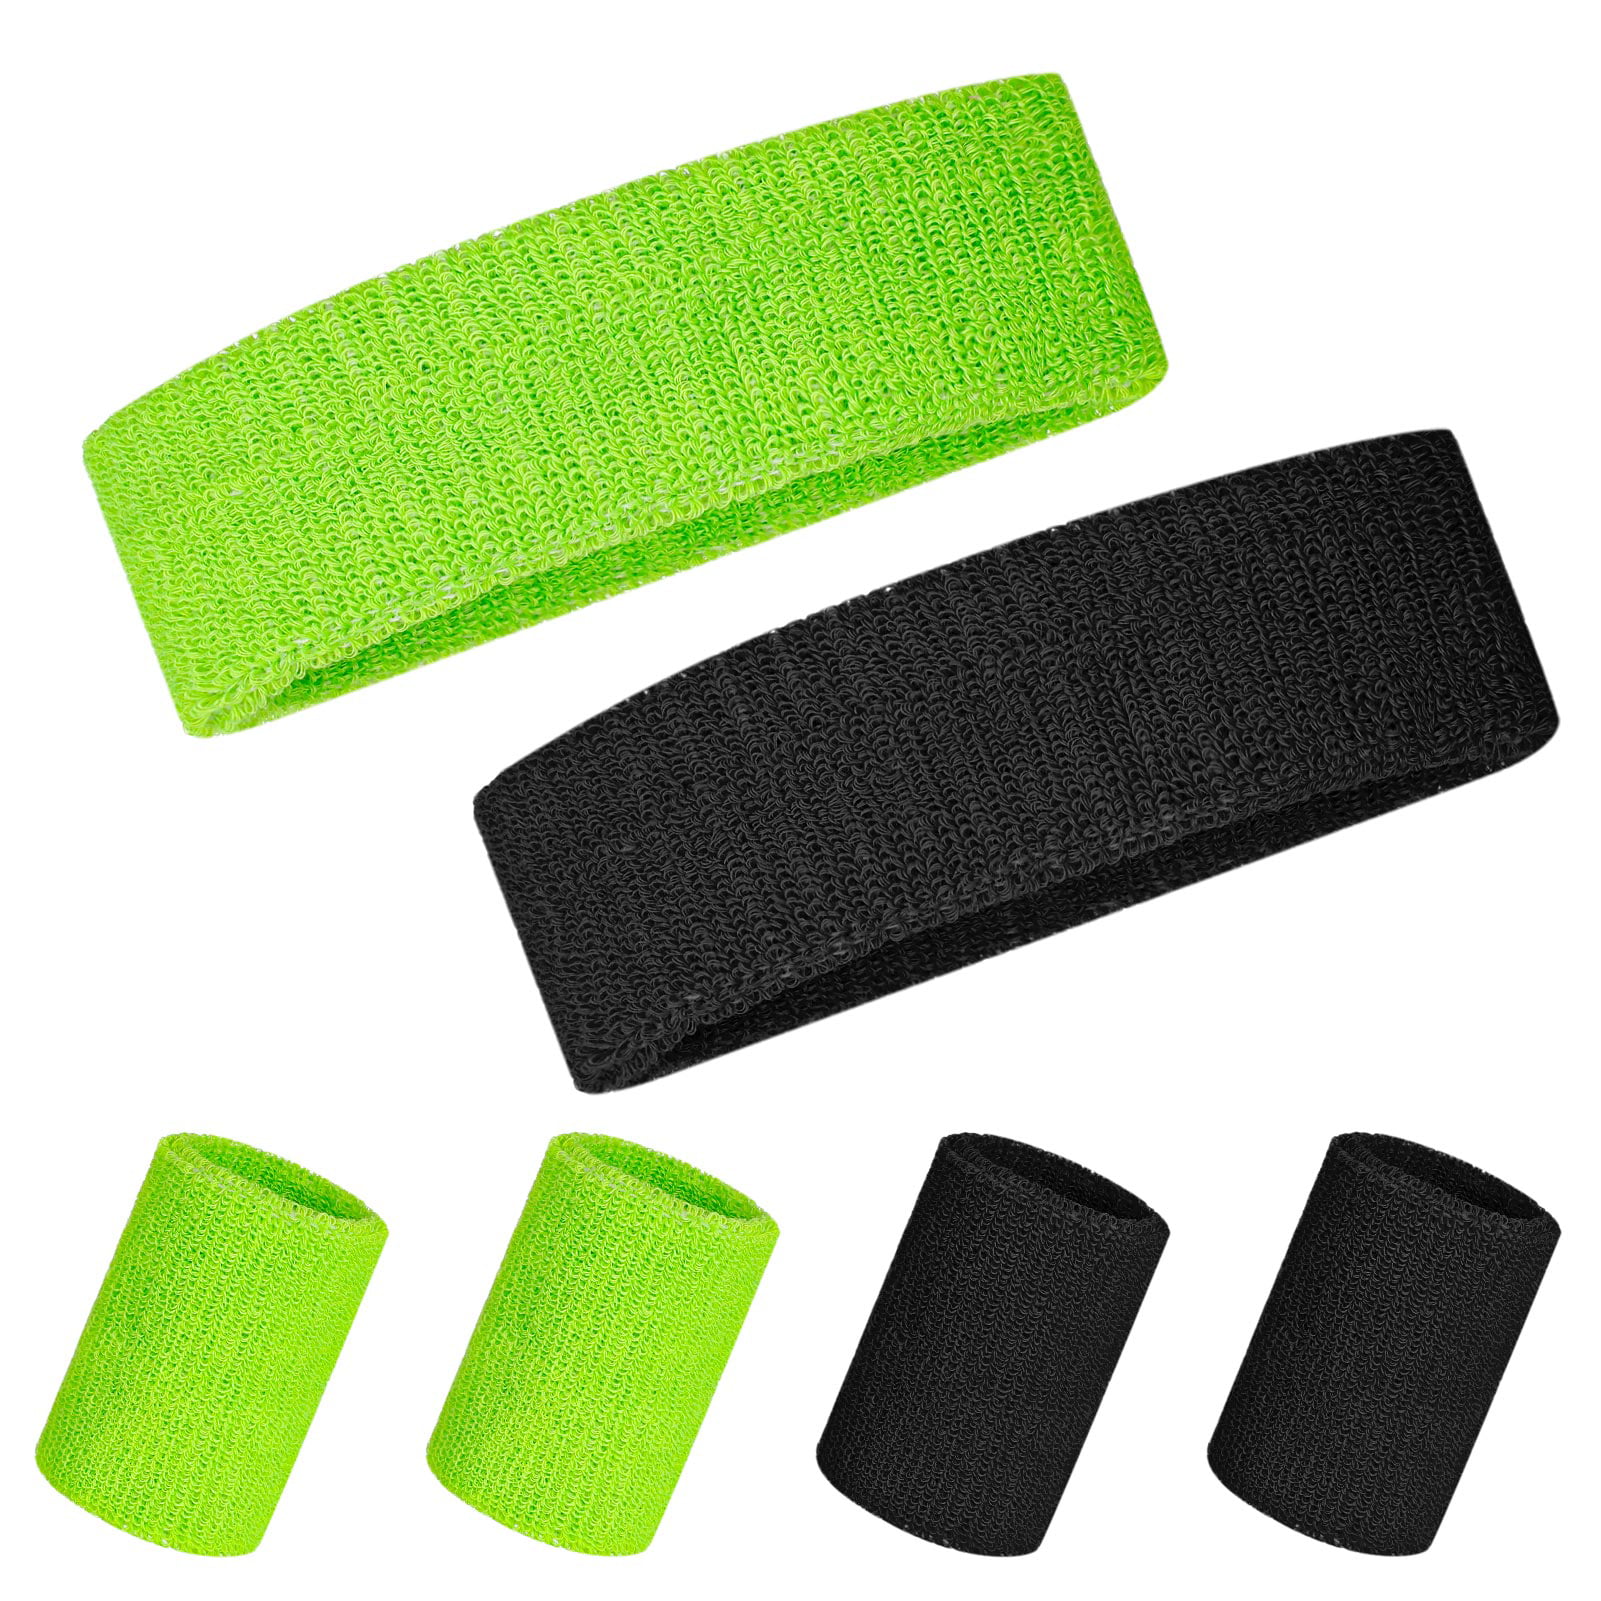 Mallofusa 10 Pack Colorful Sports Basketball Football Absorbent Wristband Party Outdoor Activity 